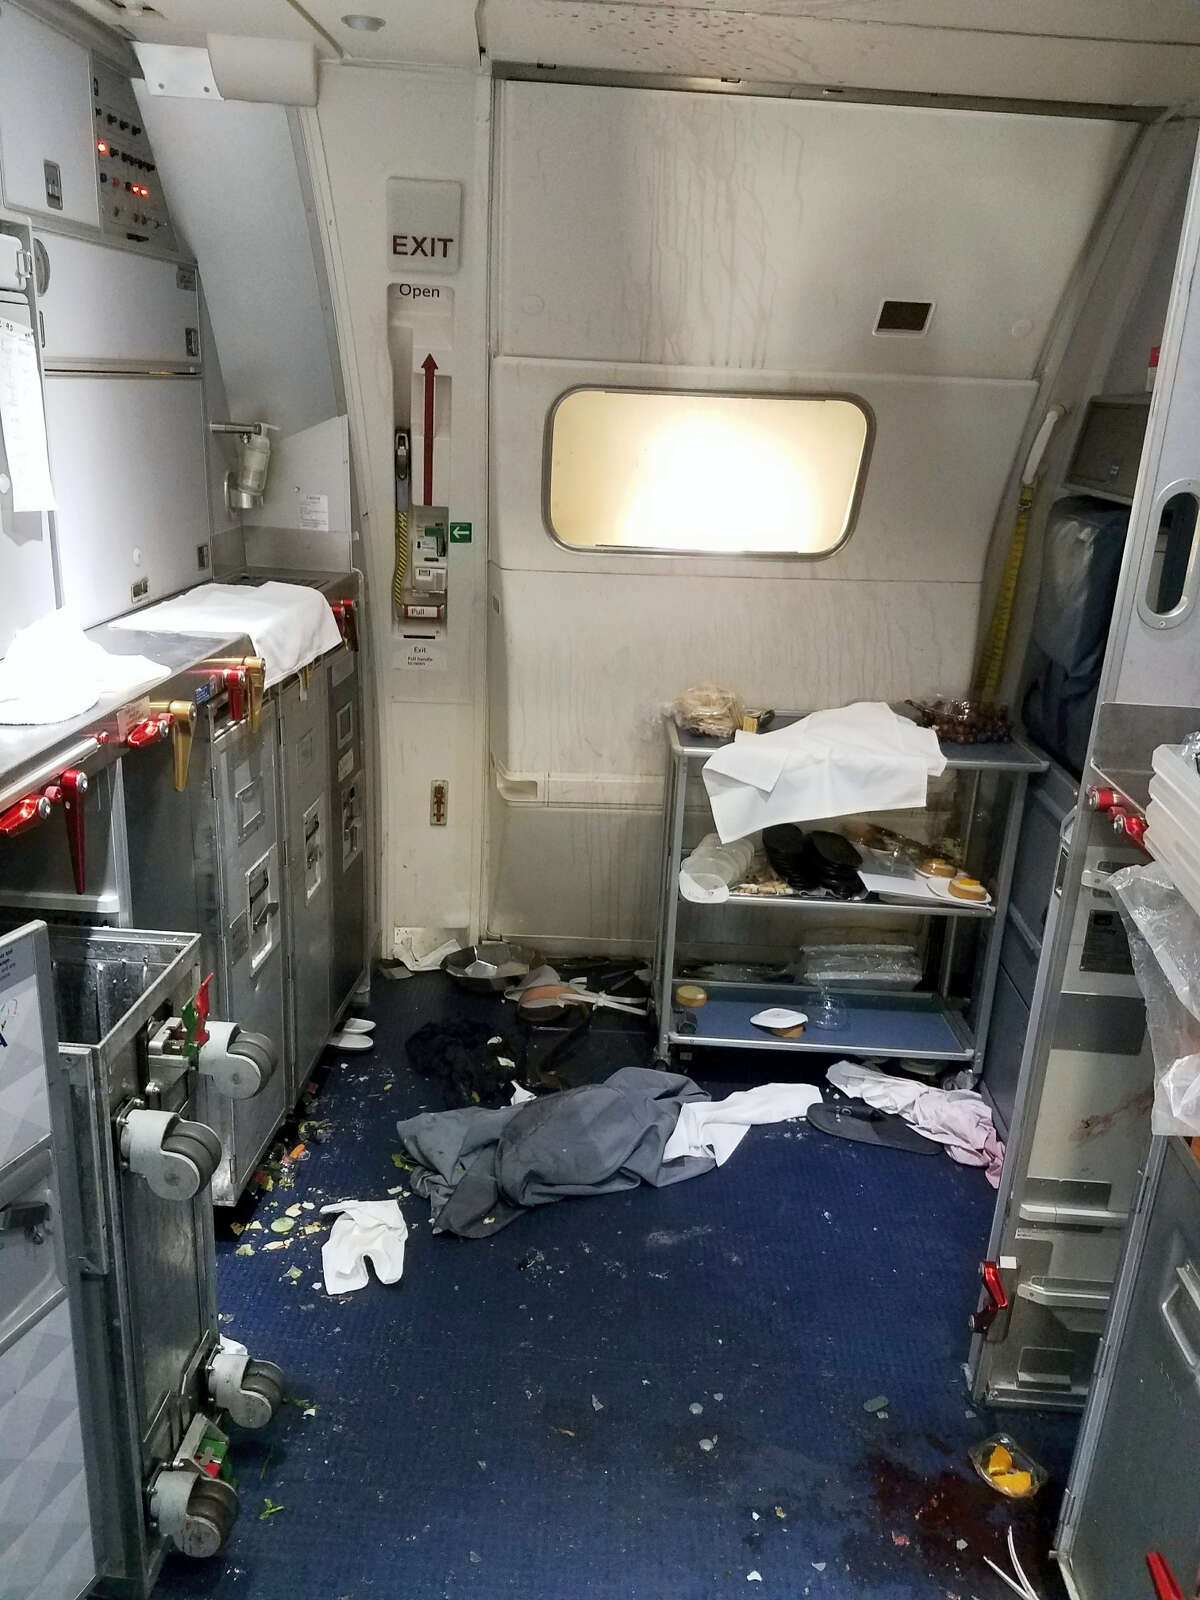 This Friday, July 7, 2017 photo taken the FBI and released via the U.S. Attorney’s Office in Seattle shows the aftermath of a cabin on Delta Flight 129 from Seattle to Beijing, after authorities say flight attendants struggled with Joseph Daniel Hudek IV, a passenger who lunged for an exit door. The photo was included in a criminal complaint filed Friday, July 7. The passenger is charged with interfering with a flight crew and faces up to 20 years in prison.